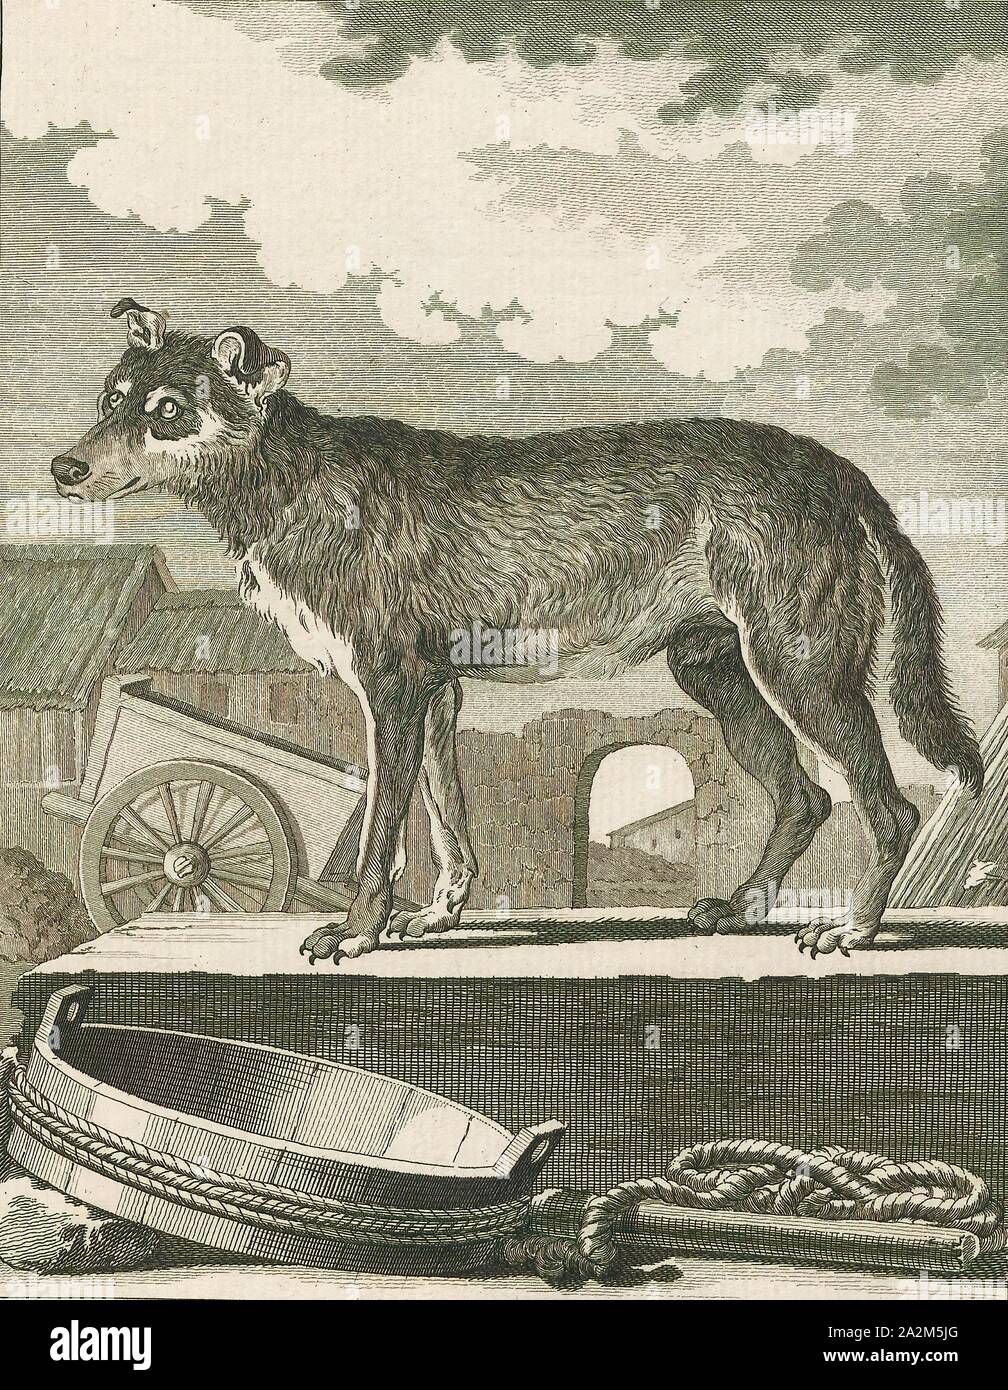 Canis lupus familiaris, Print, The domestic dog (Canis lupus familiaris  when considered a subspecies of the wolf or Canis familiaris when  considered a distinct species) is a member of the genus Canis (